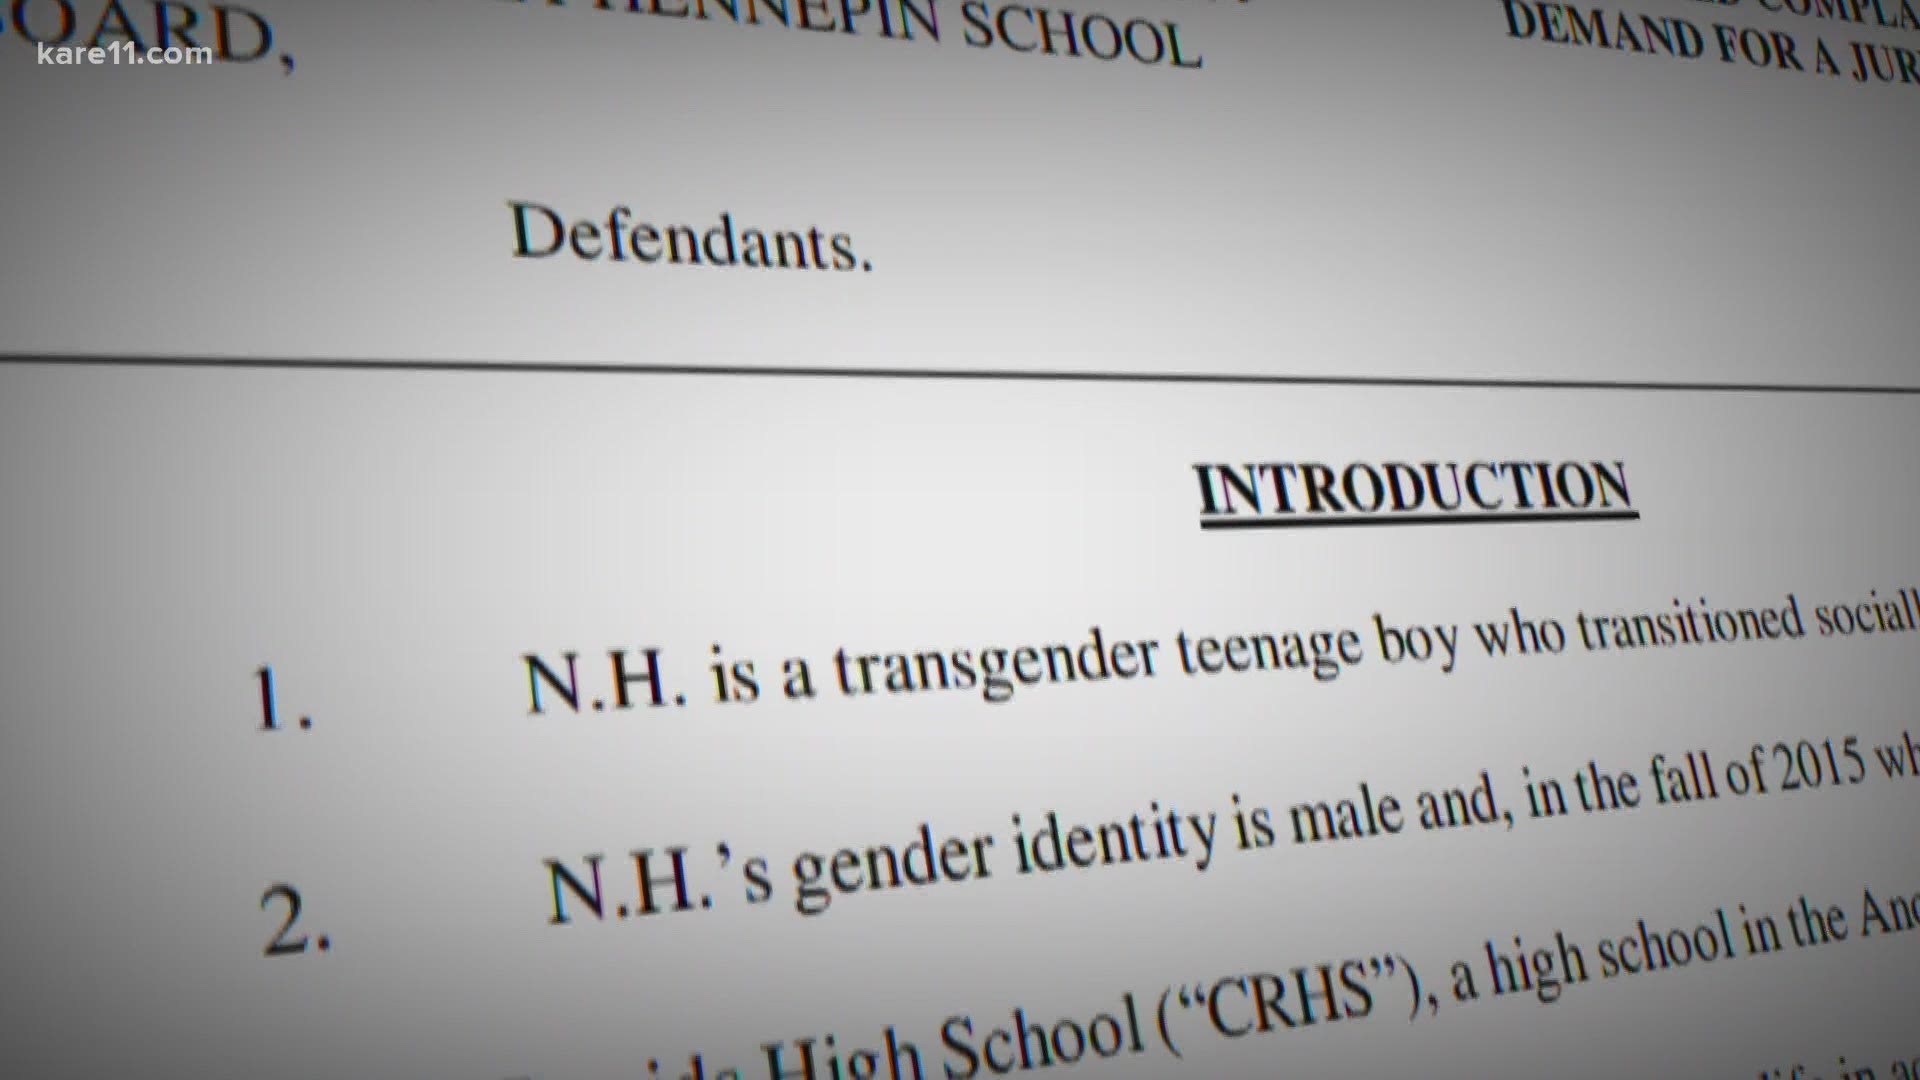 The court ruled it is a violation of the Minnesota Human Rights Act and constitution for school districts to segregate transgender students.